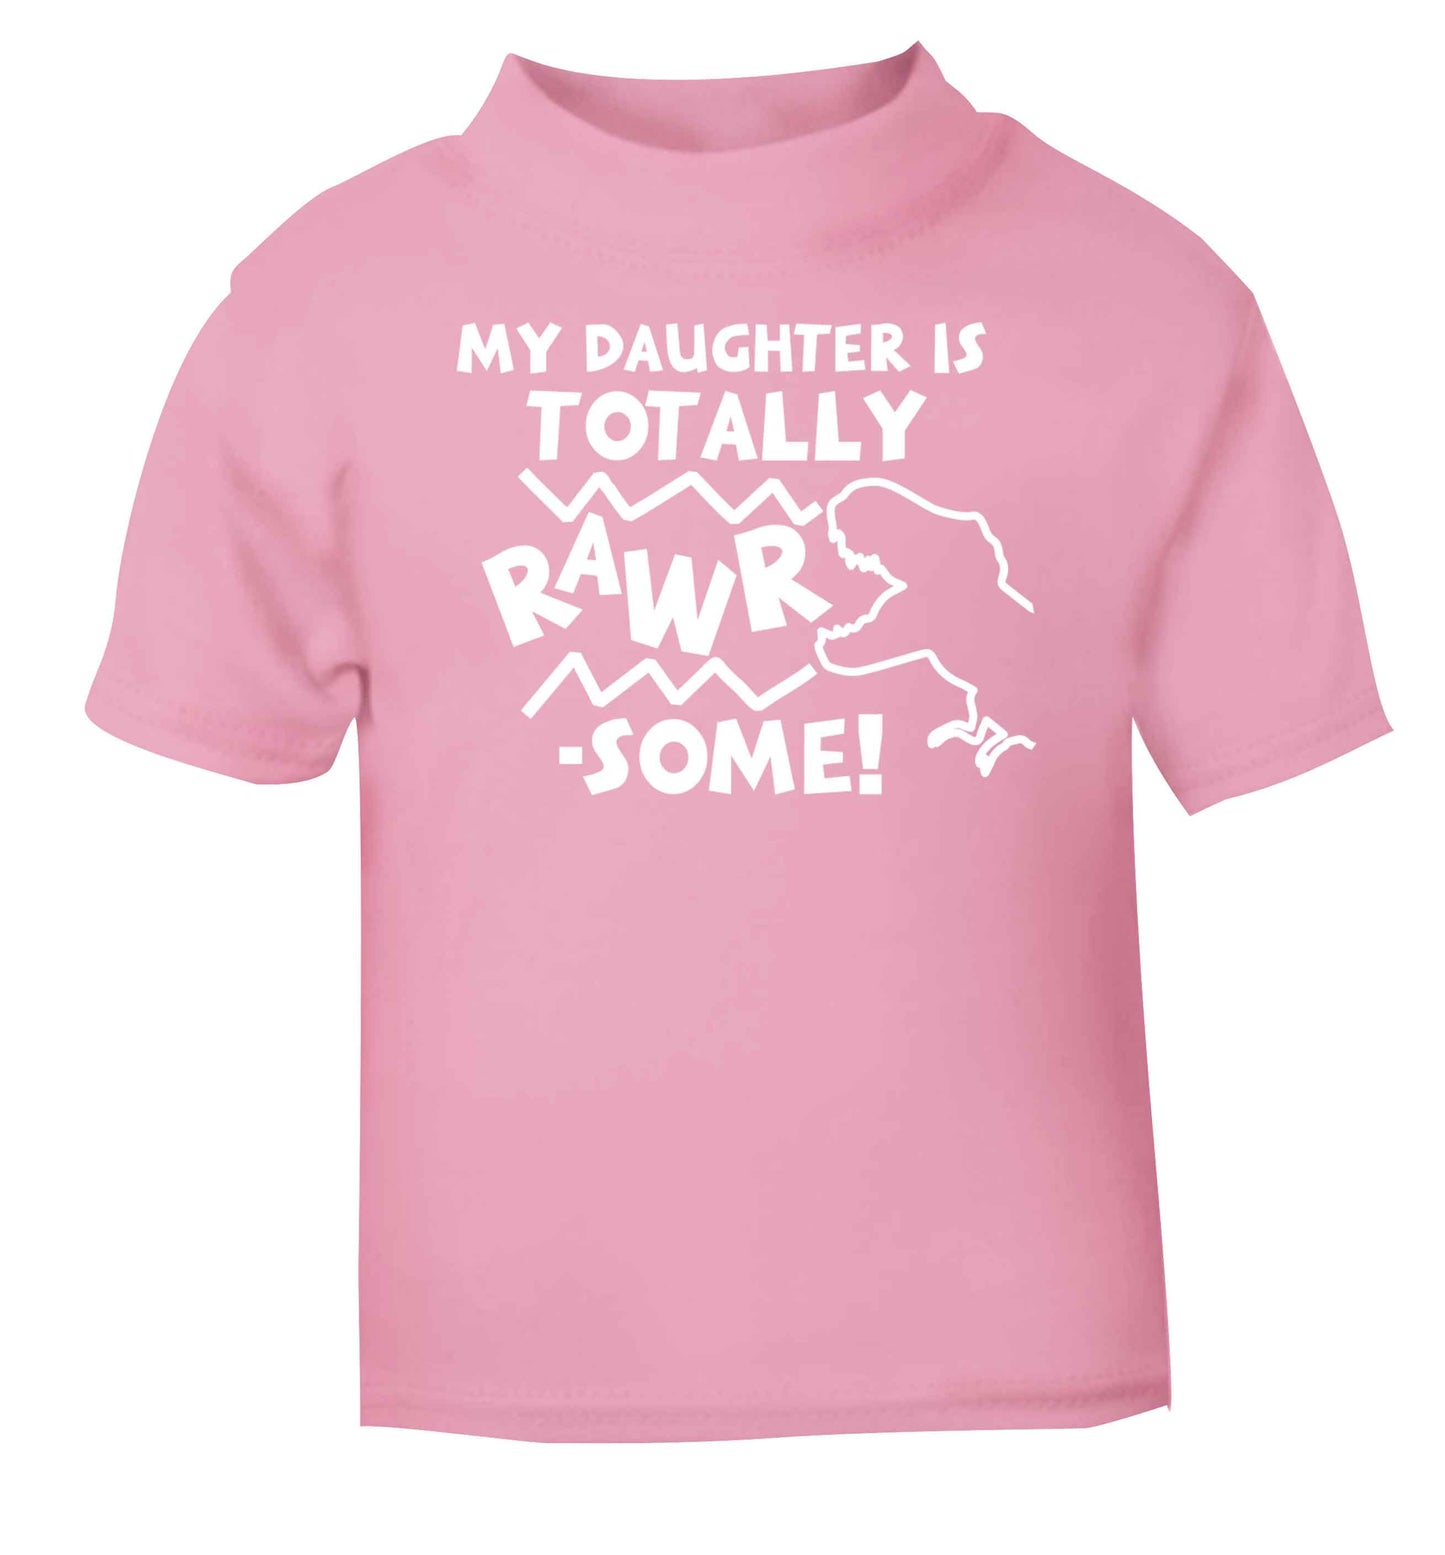 My daughter is totally rawrsome light pink baby toddler Tshirt 2 Years